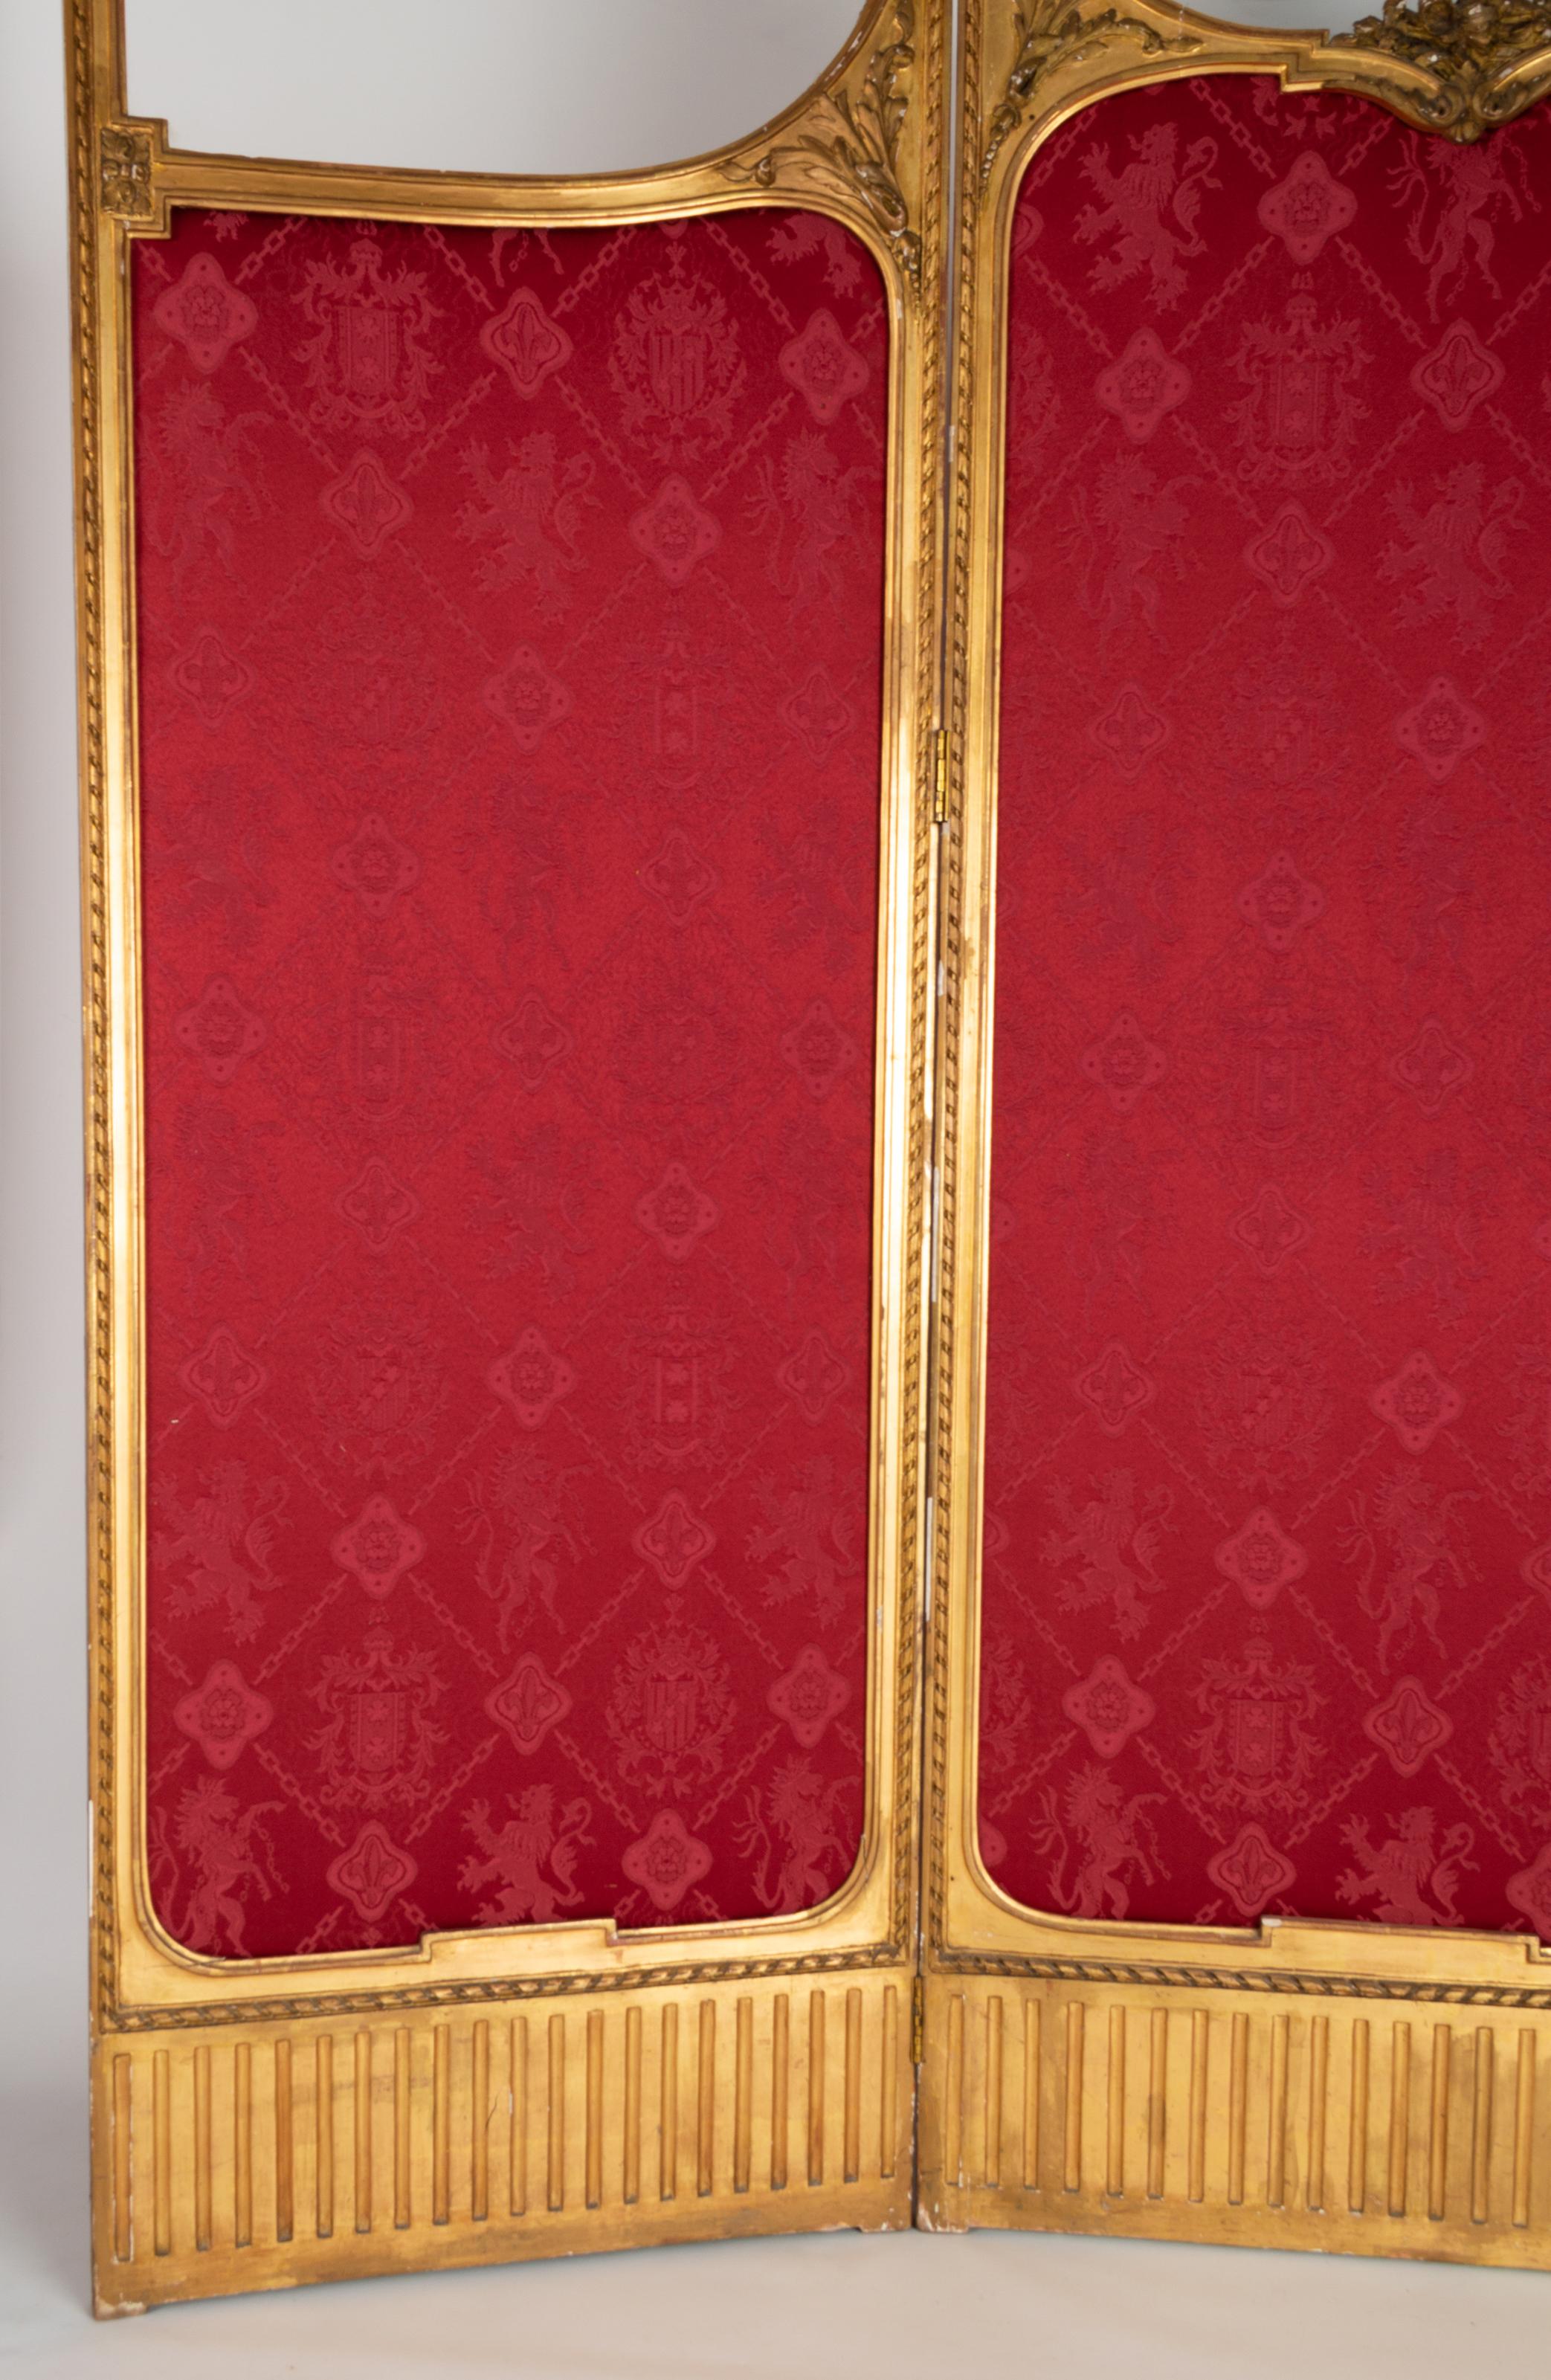 Fabric Antique 19th Century French Louis XVI Stye Gilt Three Panel Screen Room Divider For Sale